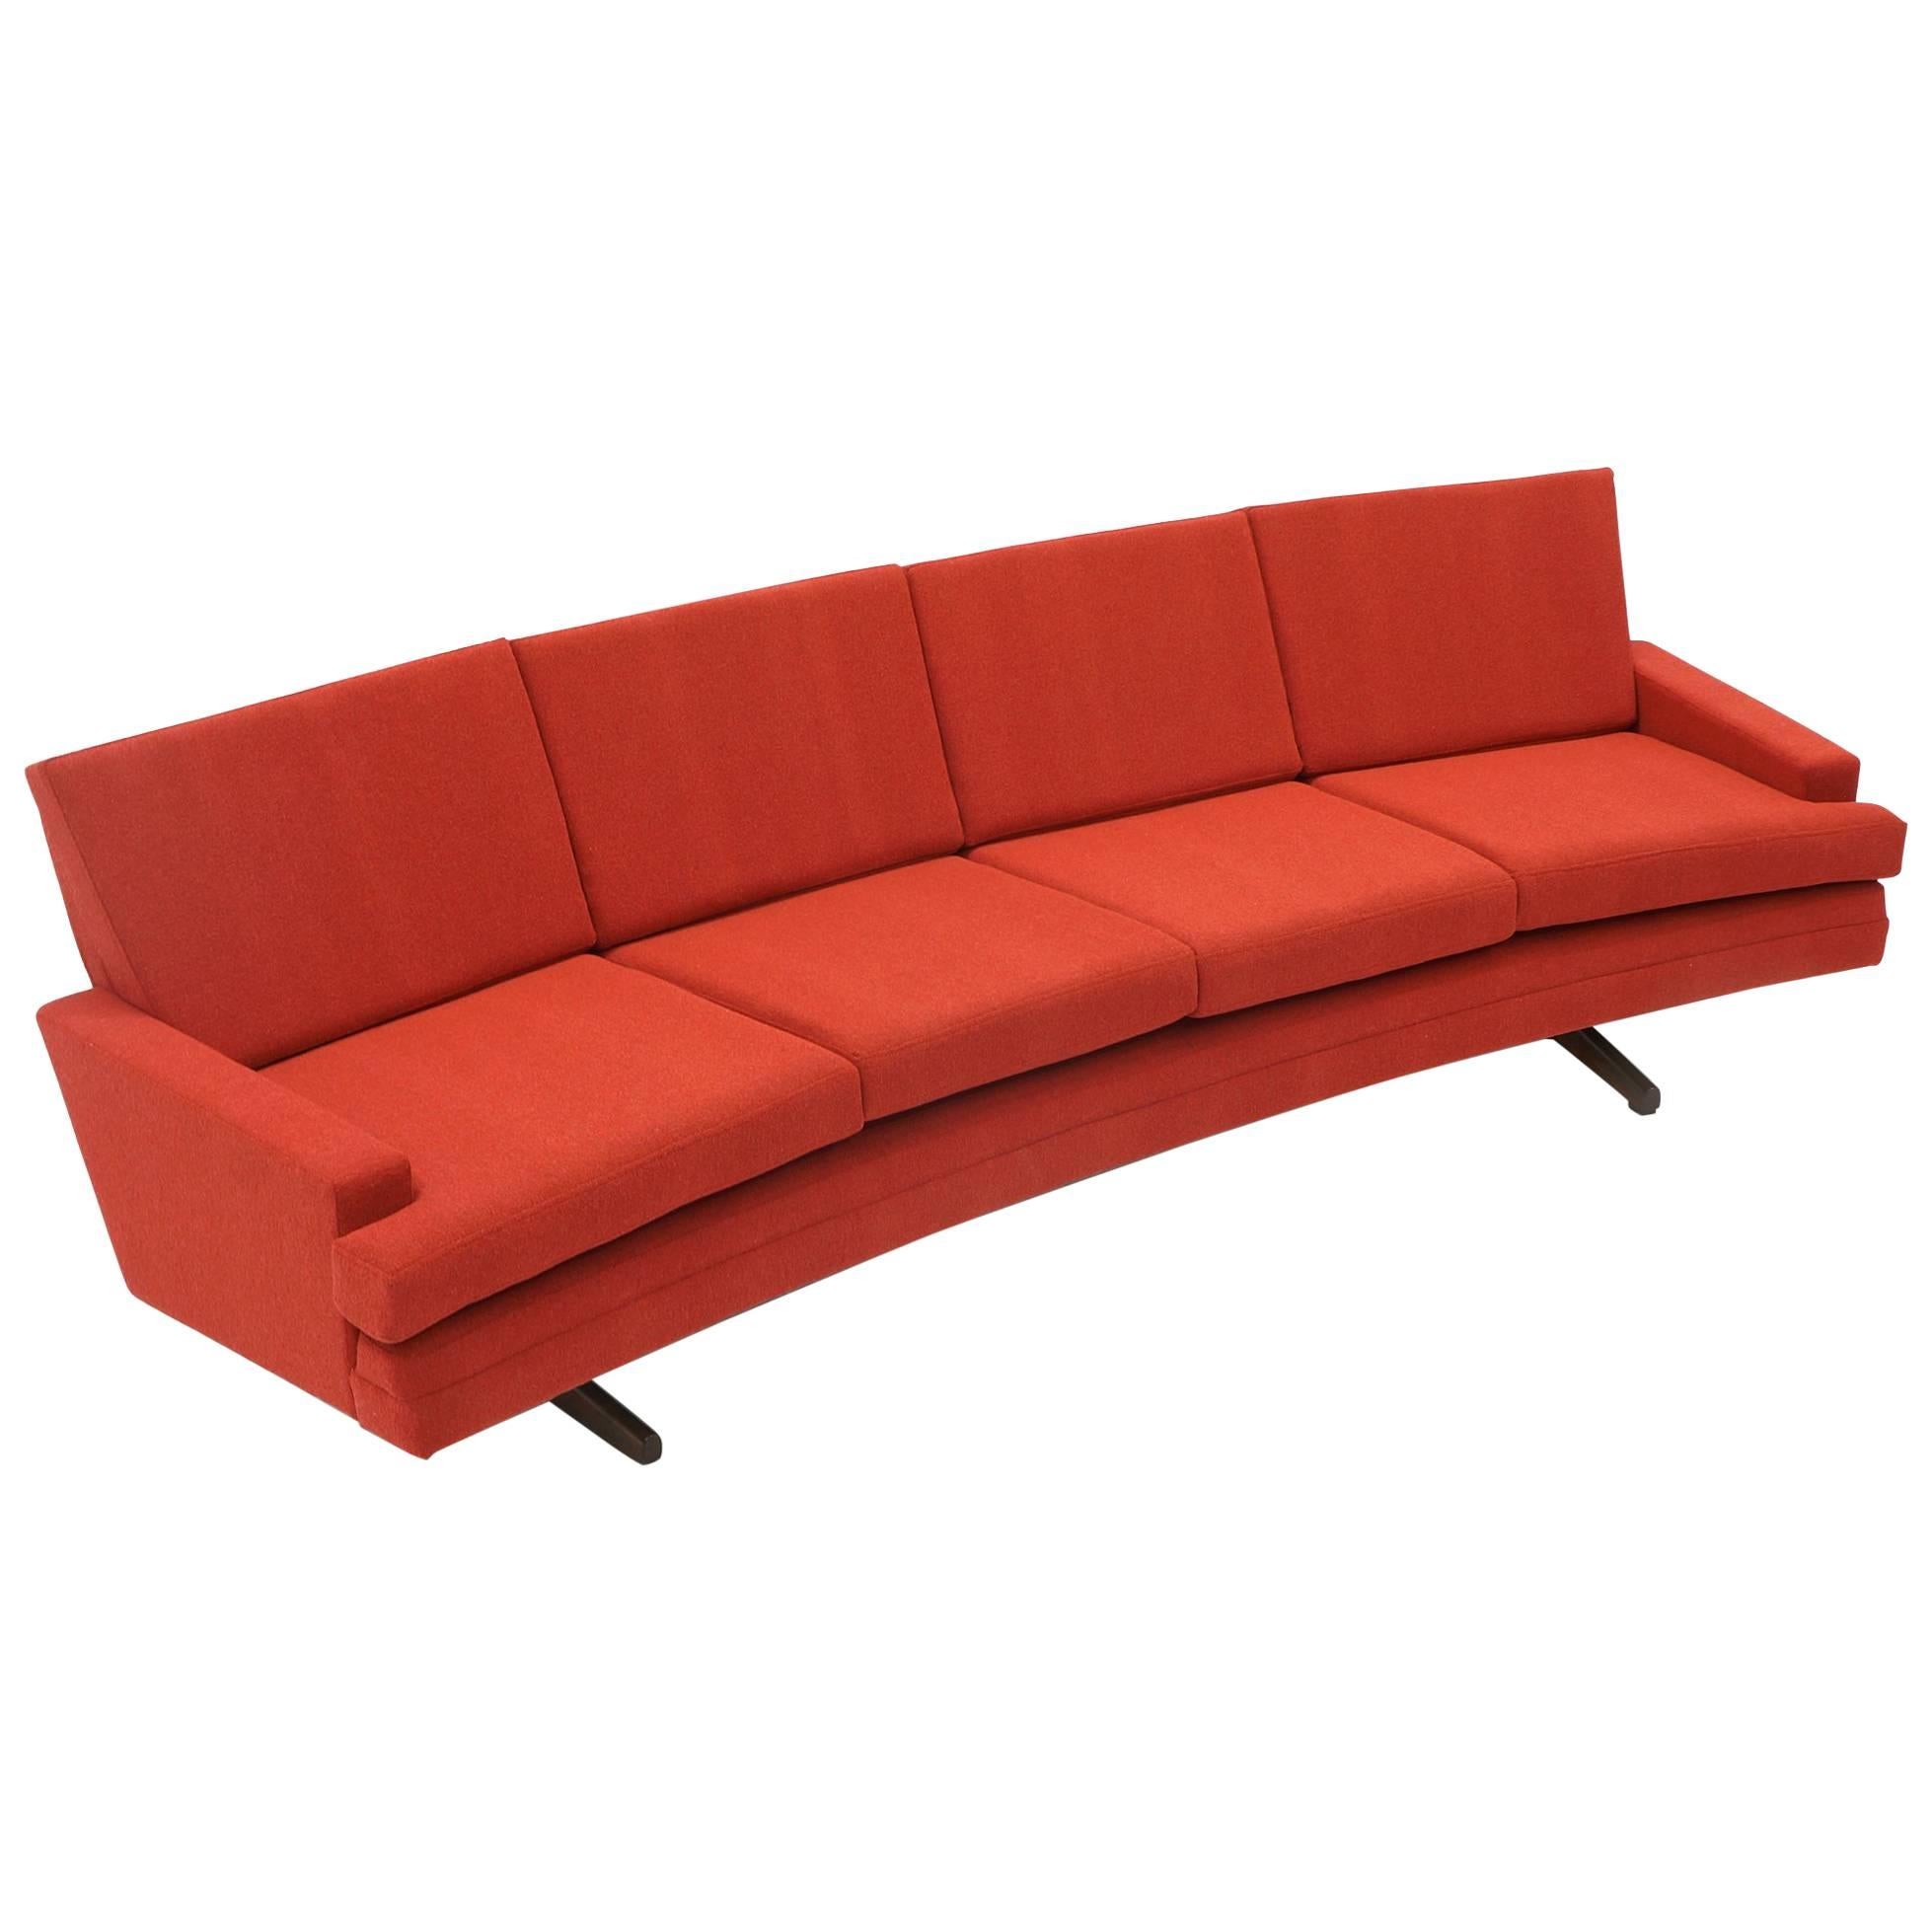 Curved Sofa by Frederick Kayser Restored Redone in Rich Red Knoll Cuddle Cloth